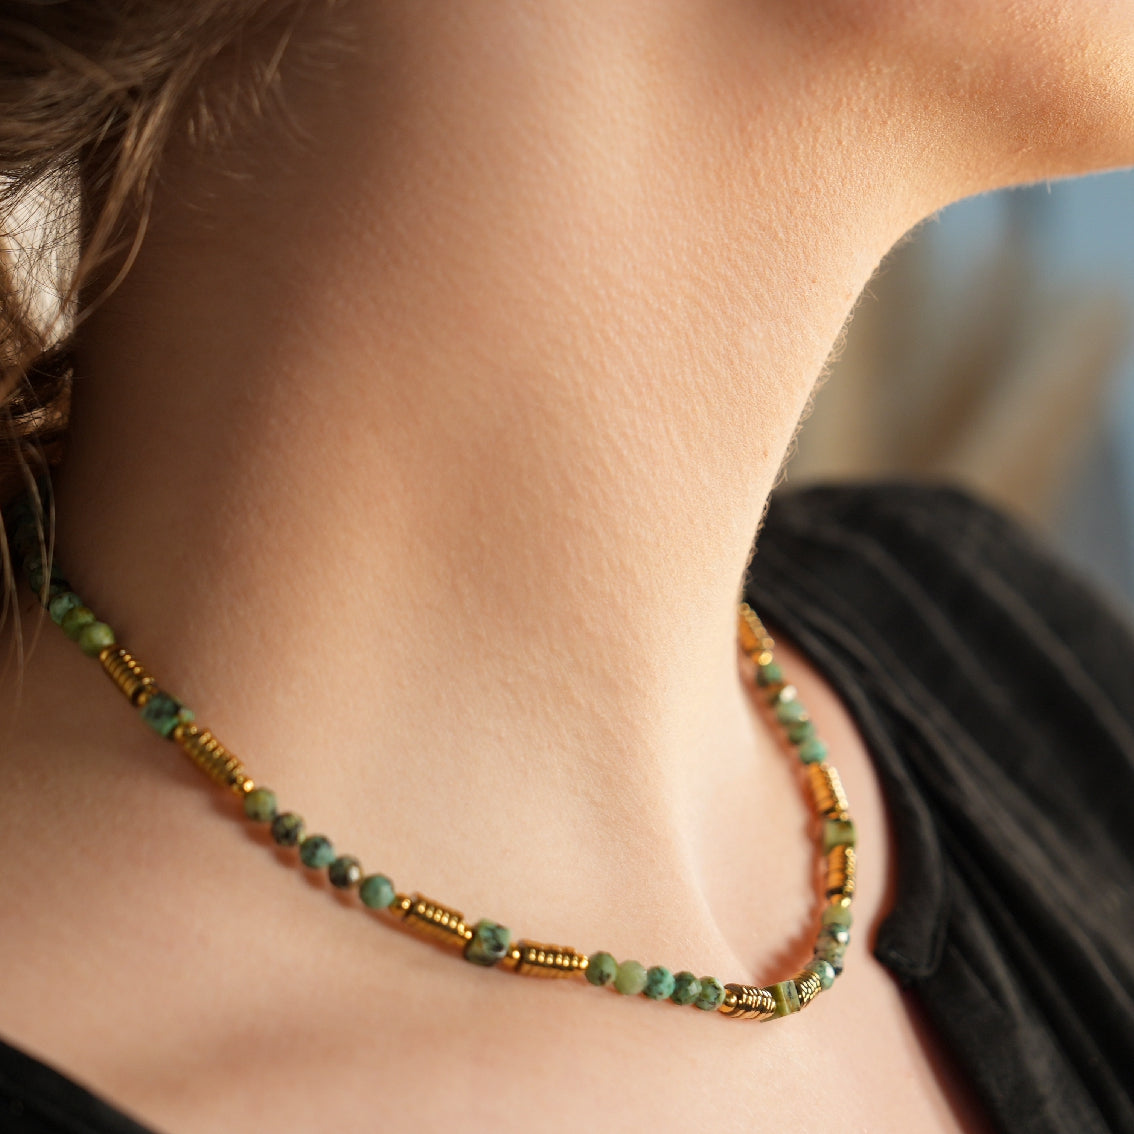 PHILIPPA: African Turquoise Stones and Gold Beaded Necklace